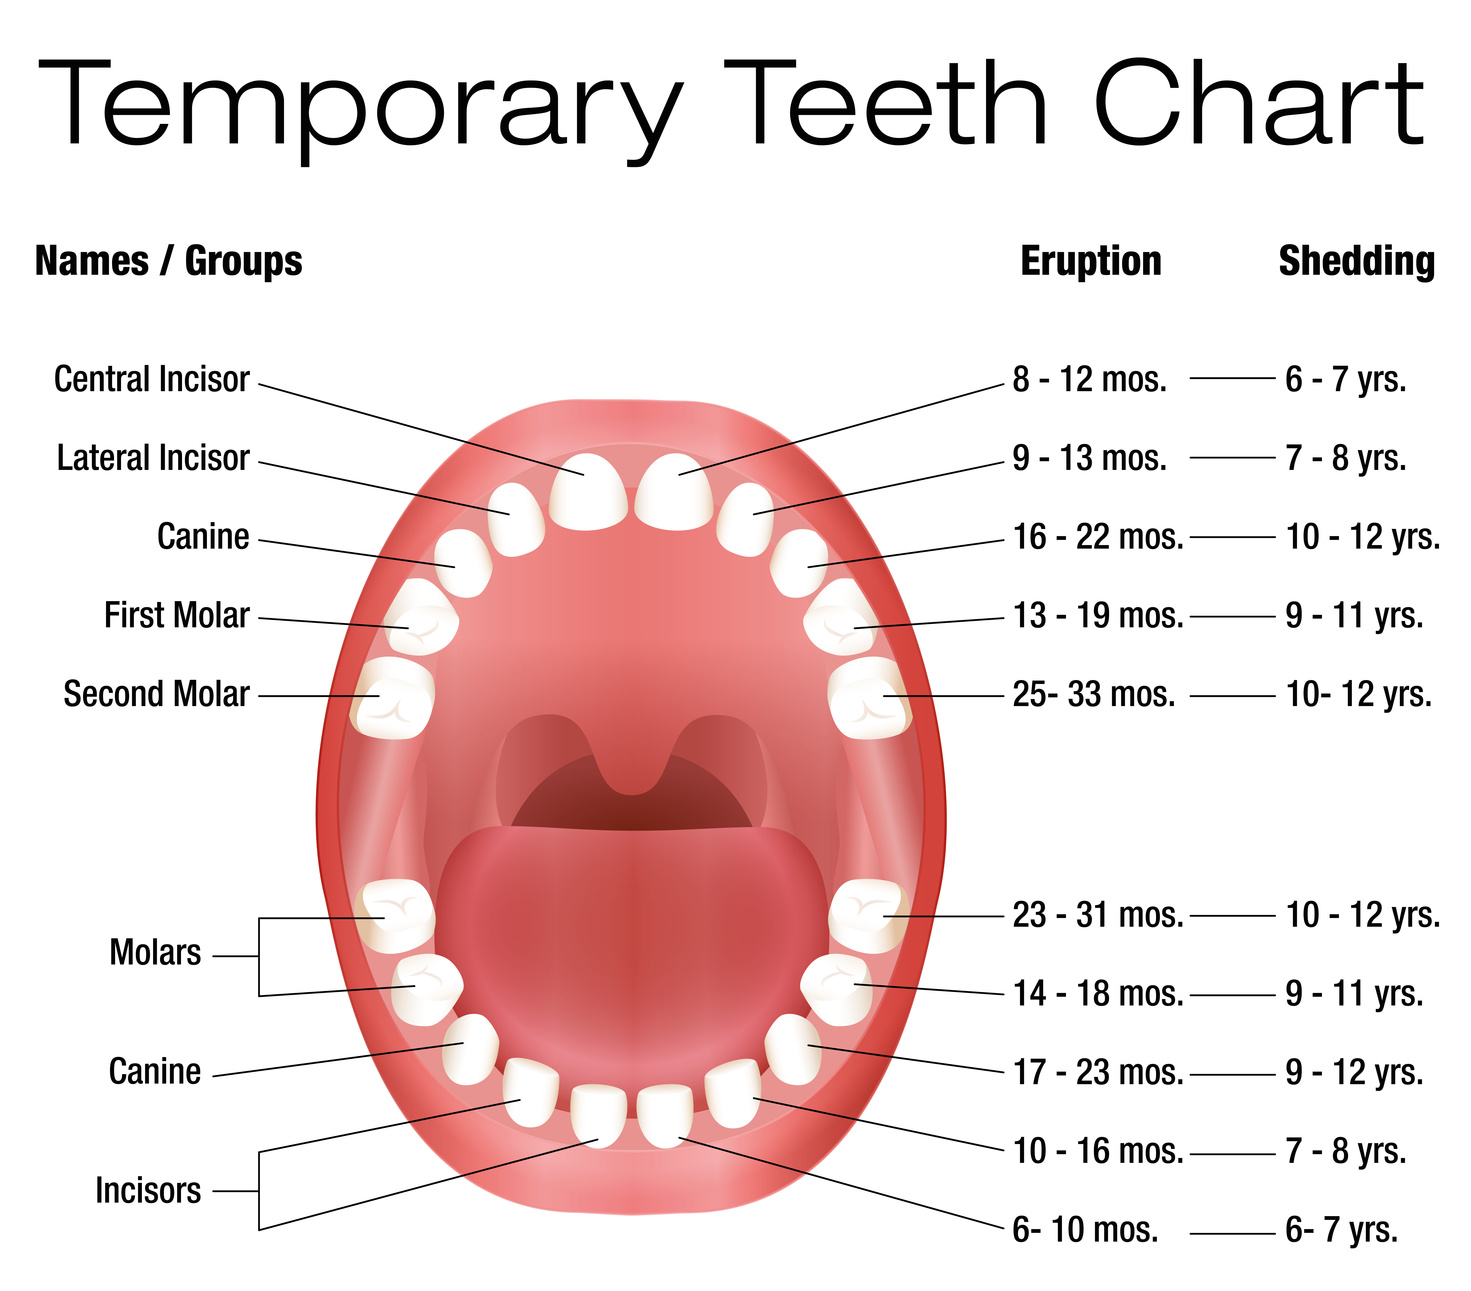 Temporary Teeth Names Groups Period Of Eruption And Shedding